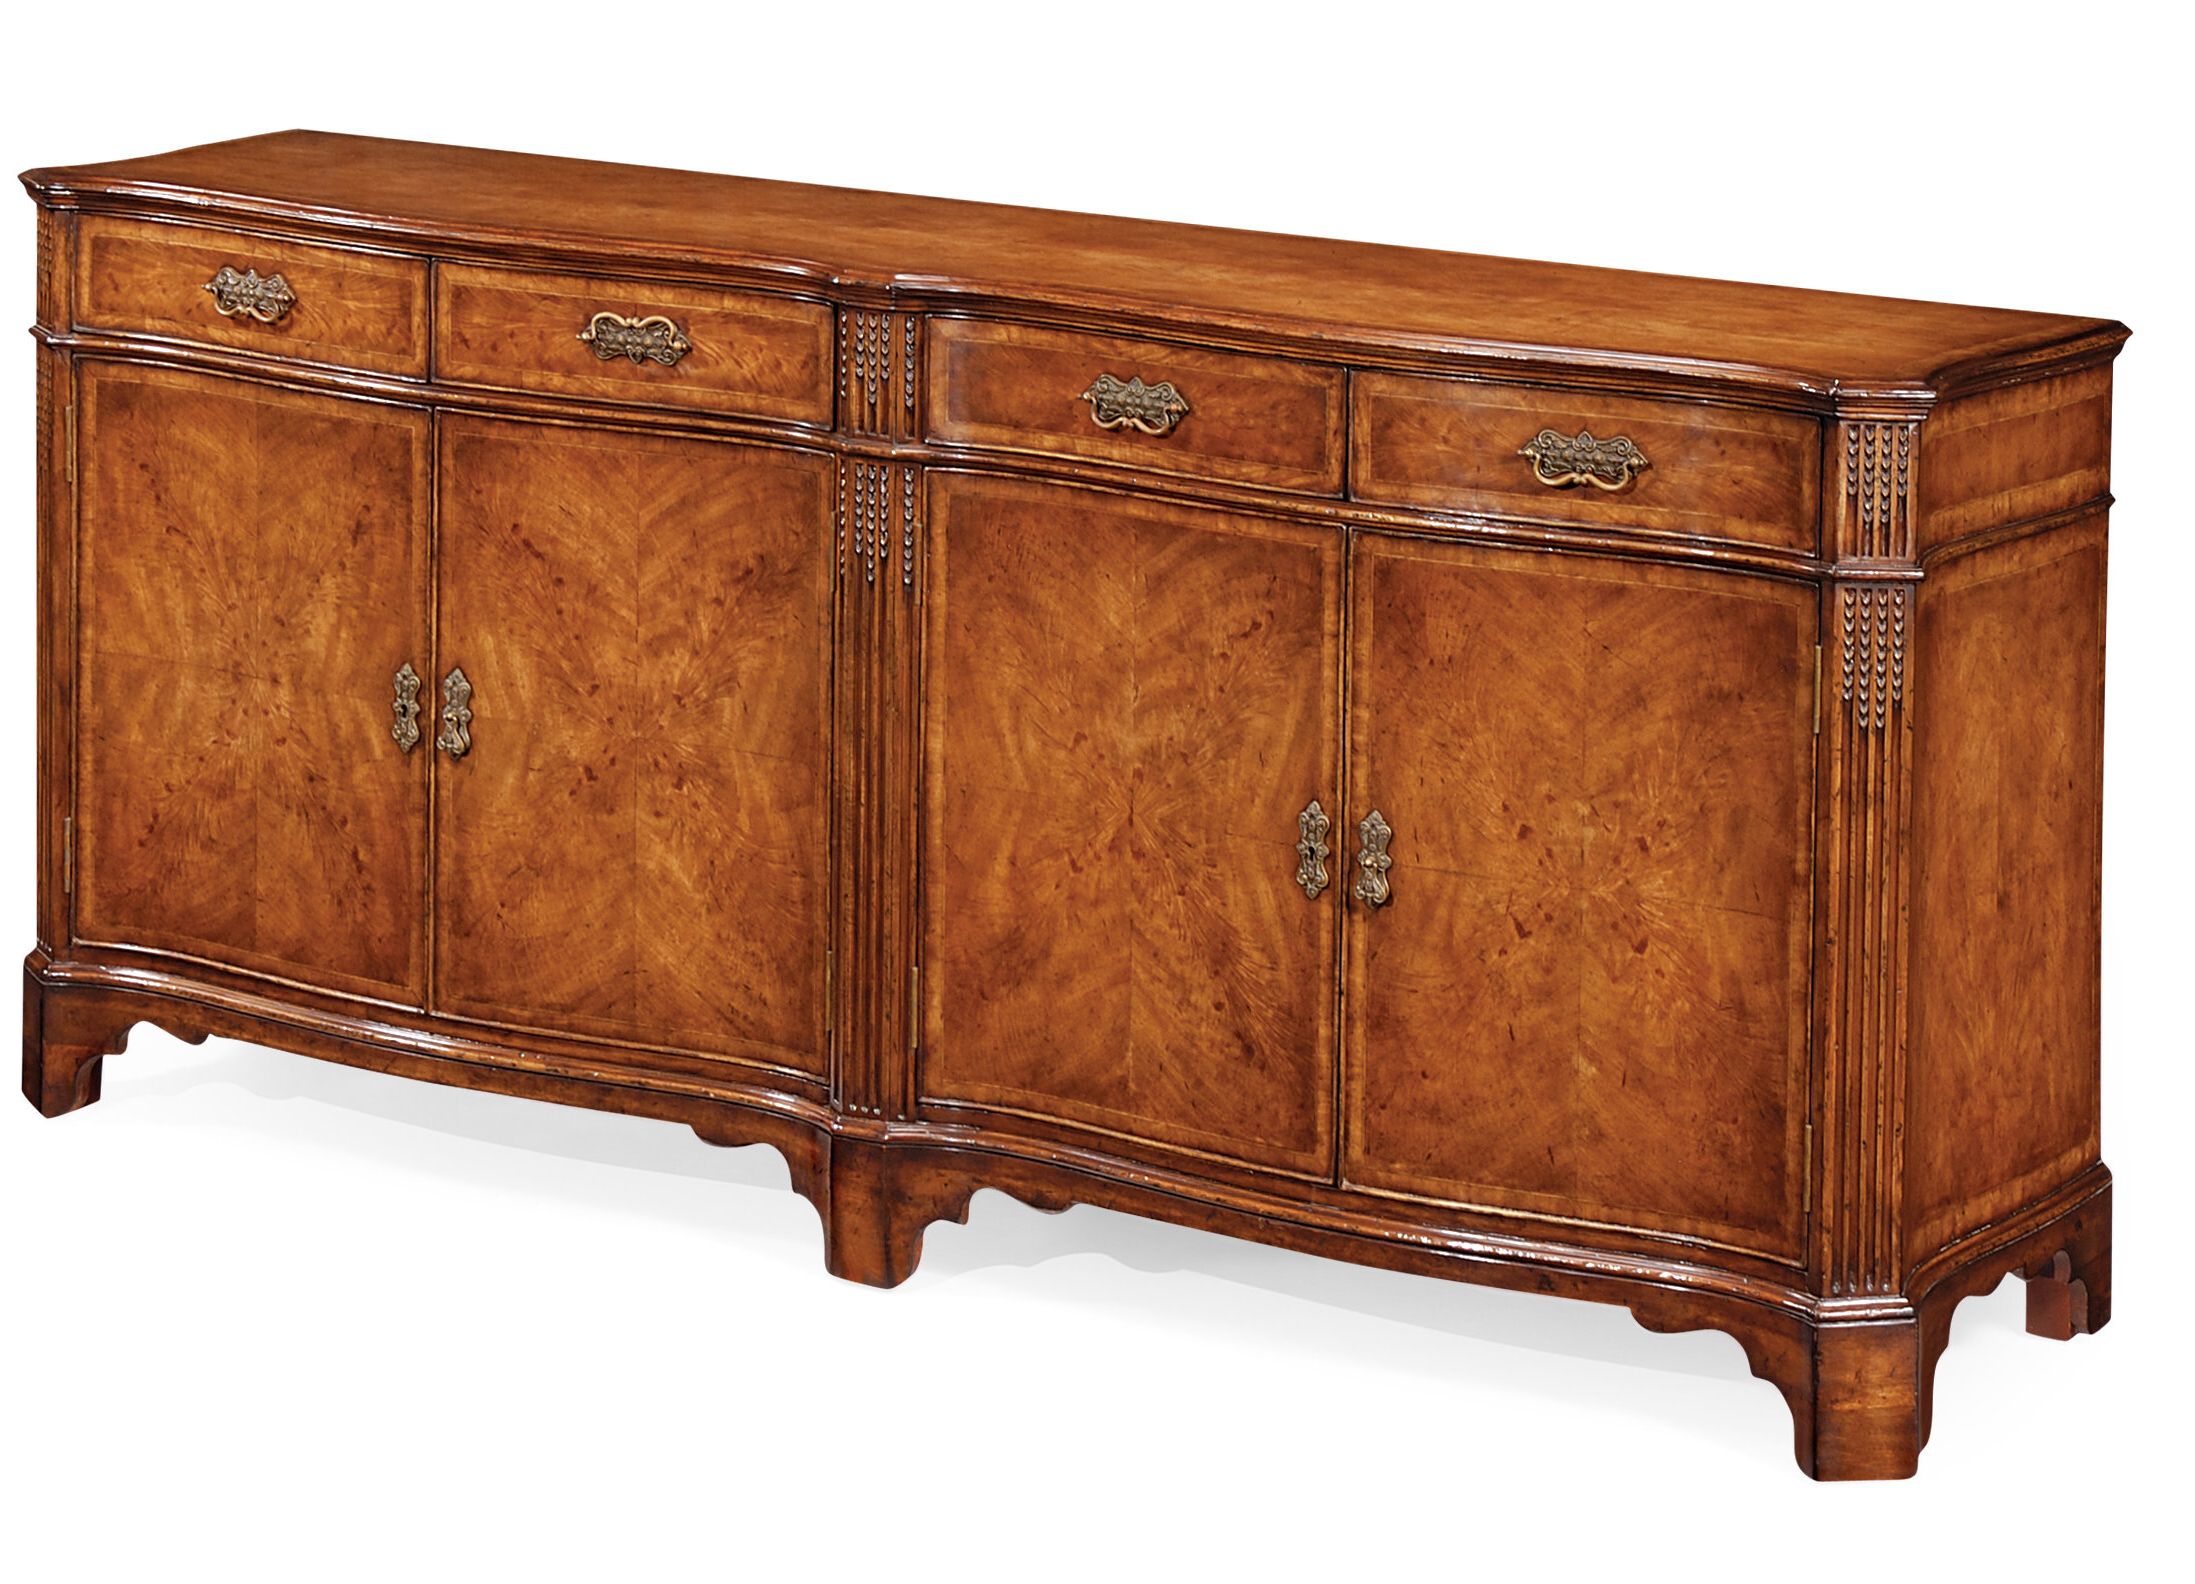 Seven Seas Asian Sideboards For Most Up To Date Double Serpentine Sideboard (View 12 of 20)